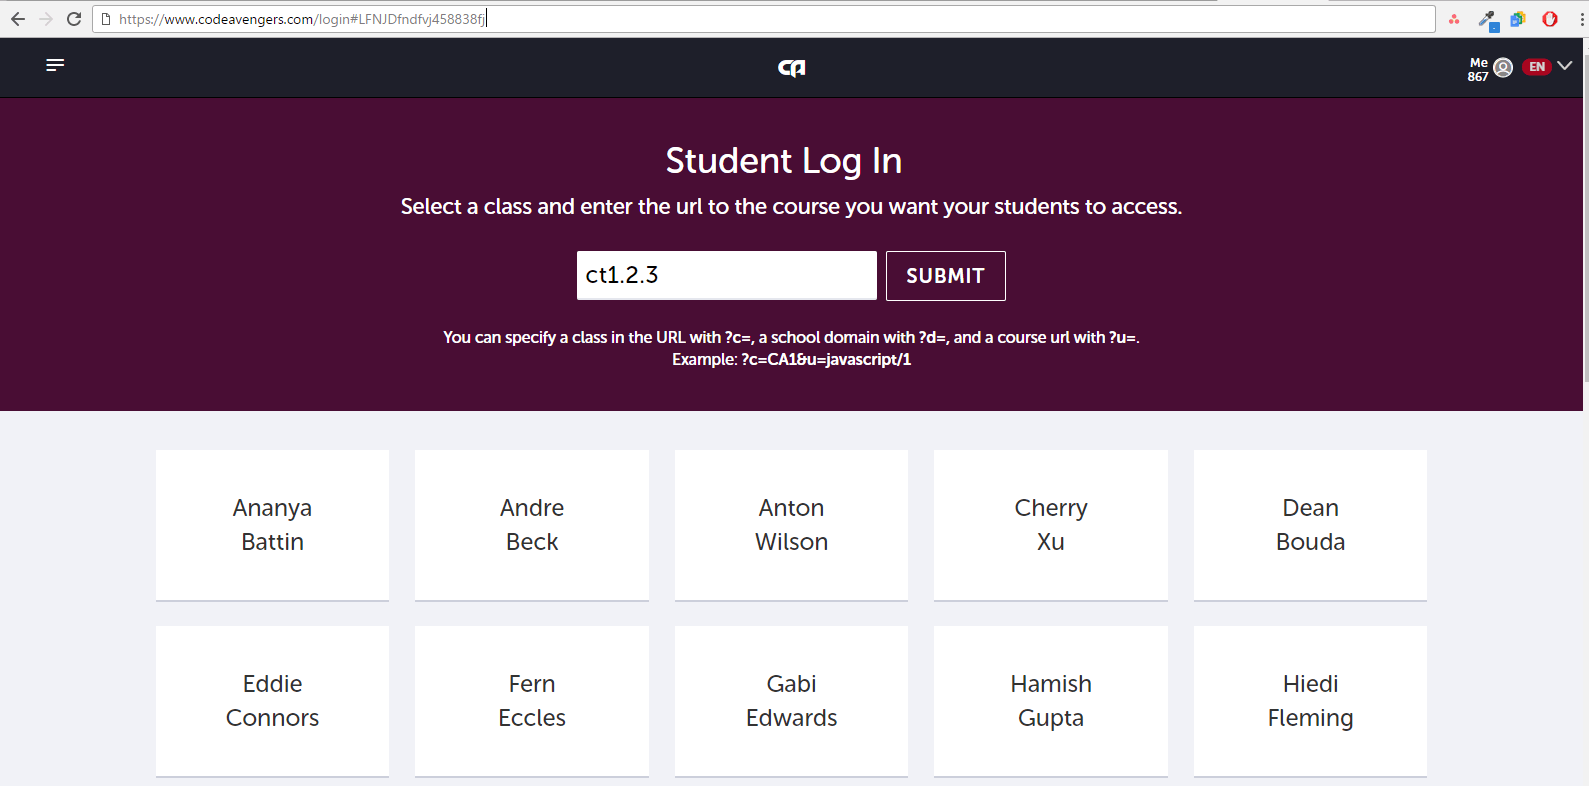 login for the whole class at once